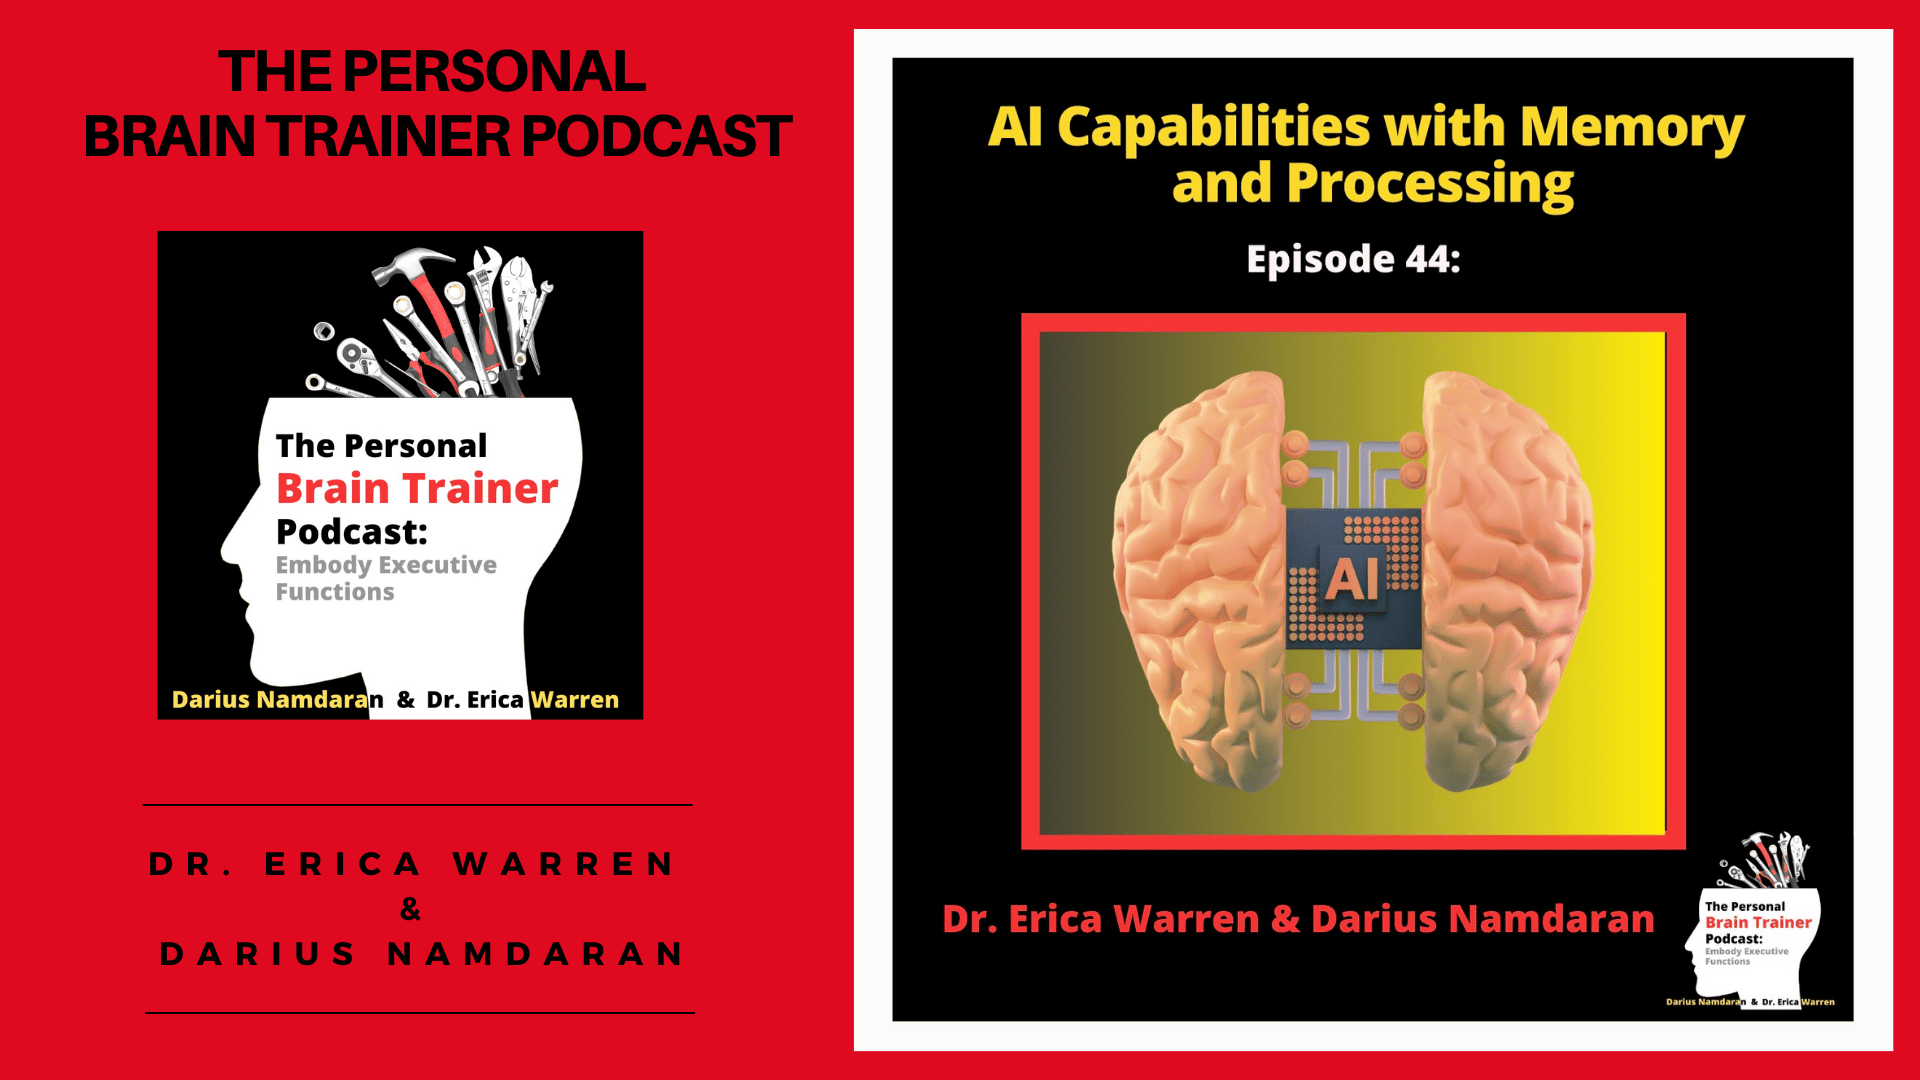 Episode 44 of the Personal Brain Trainer Podcast